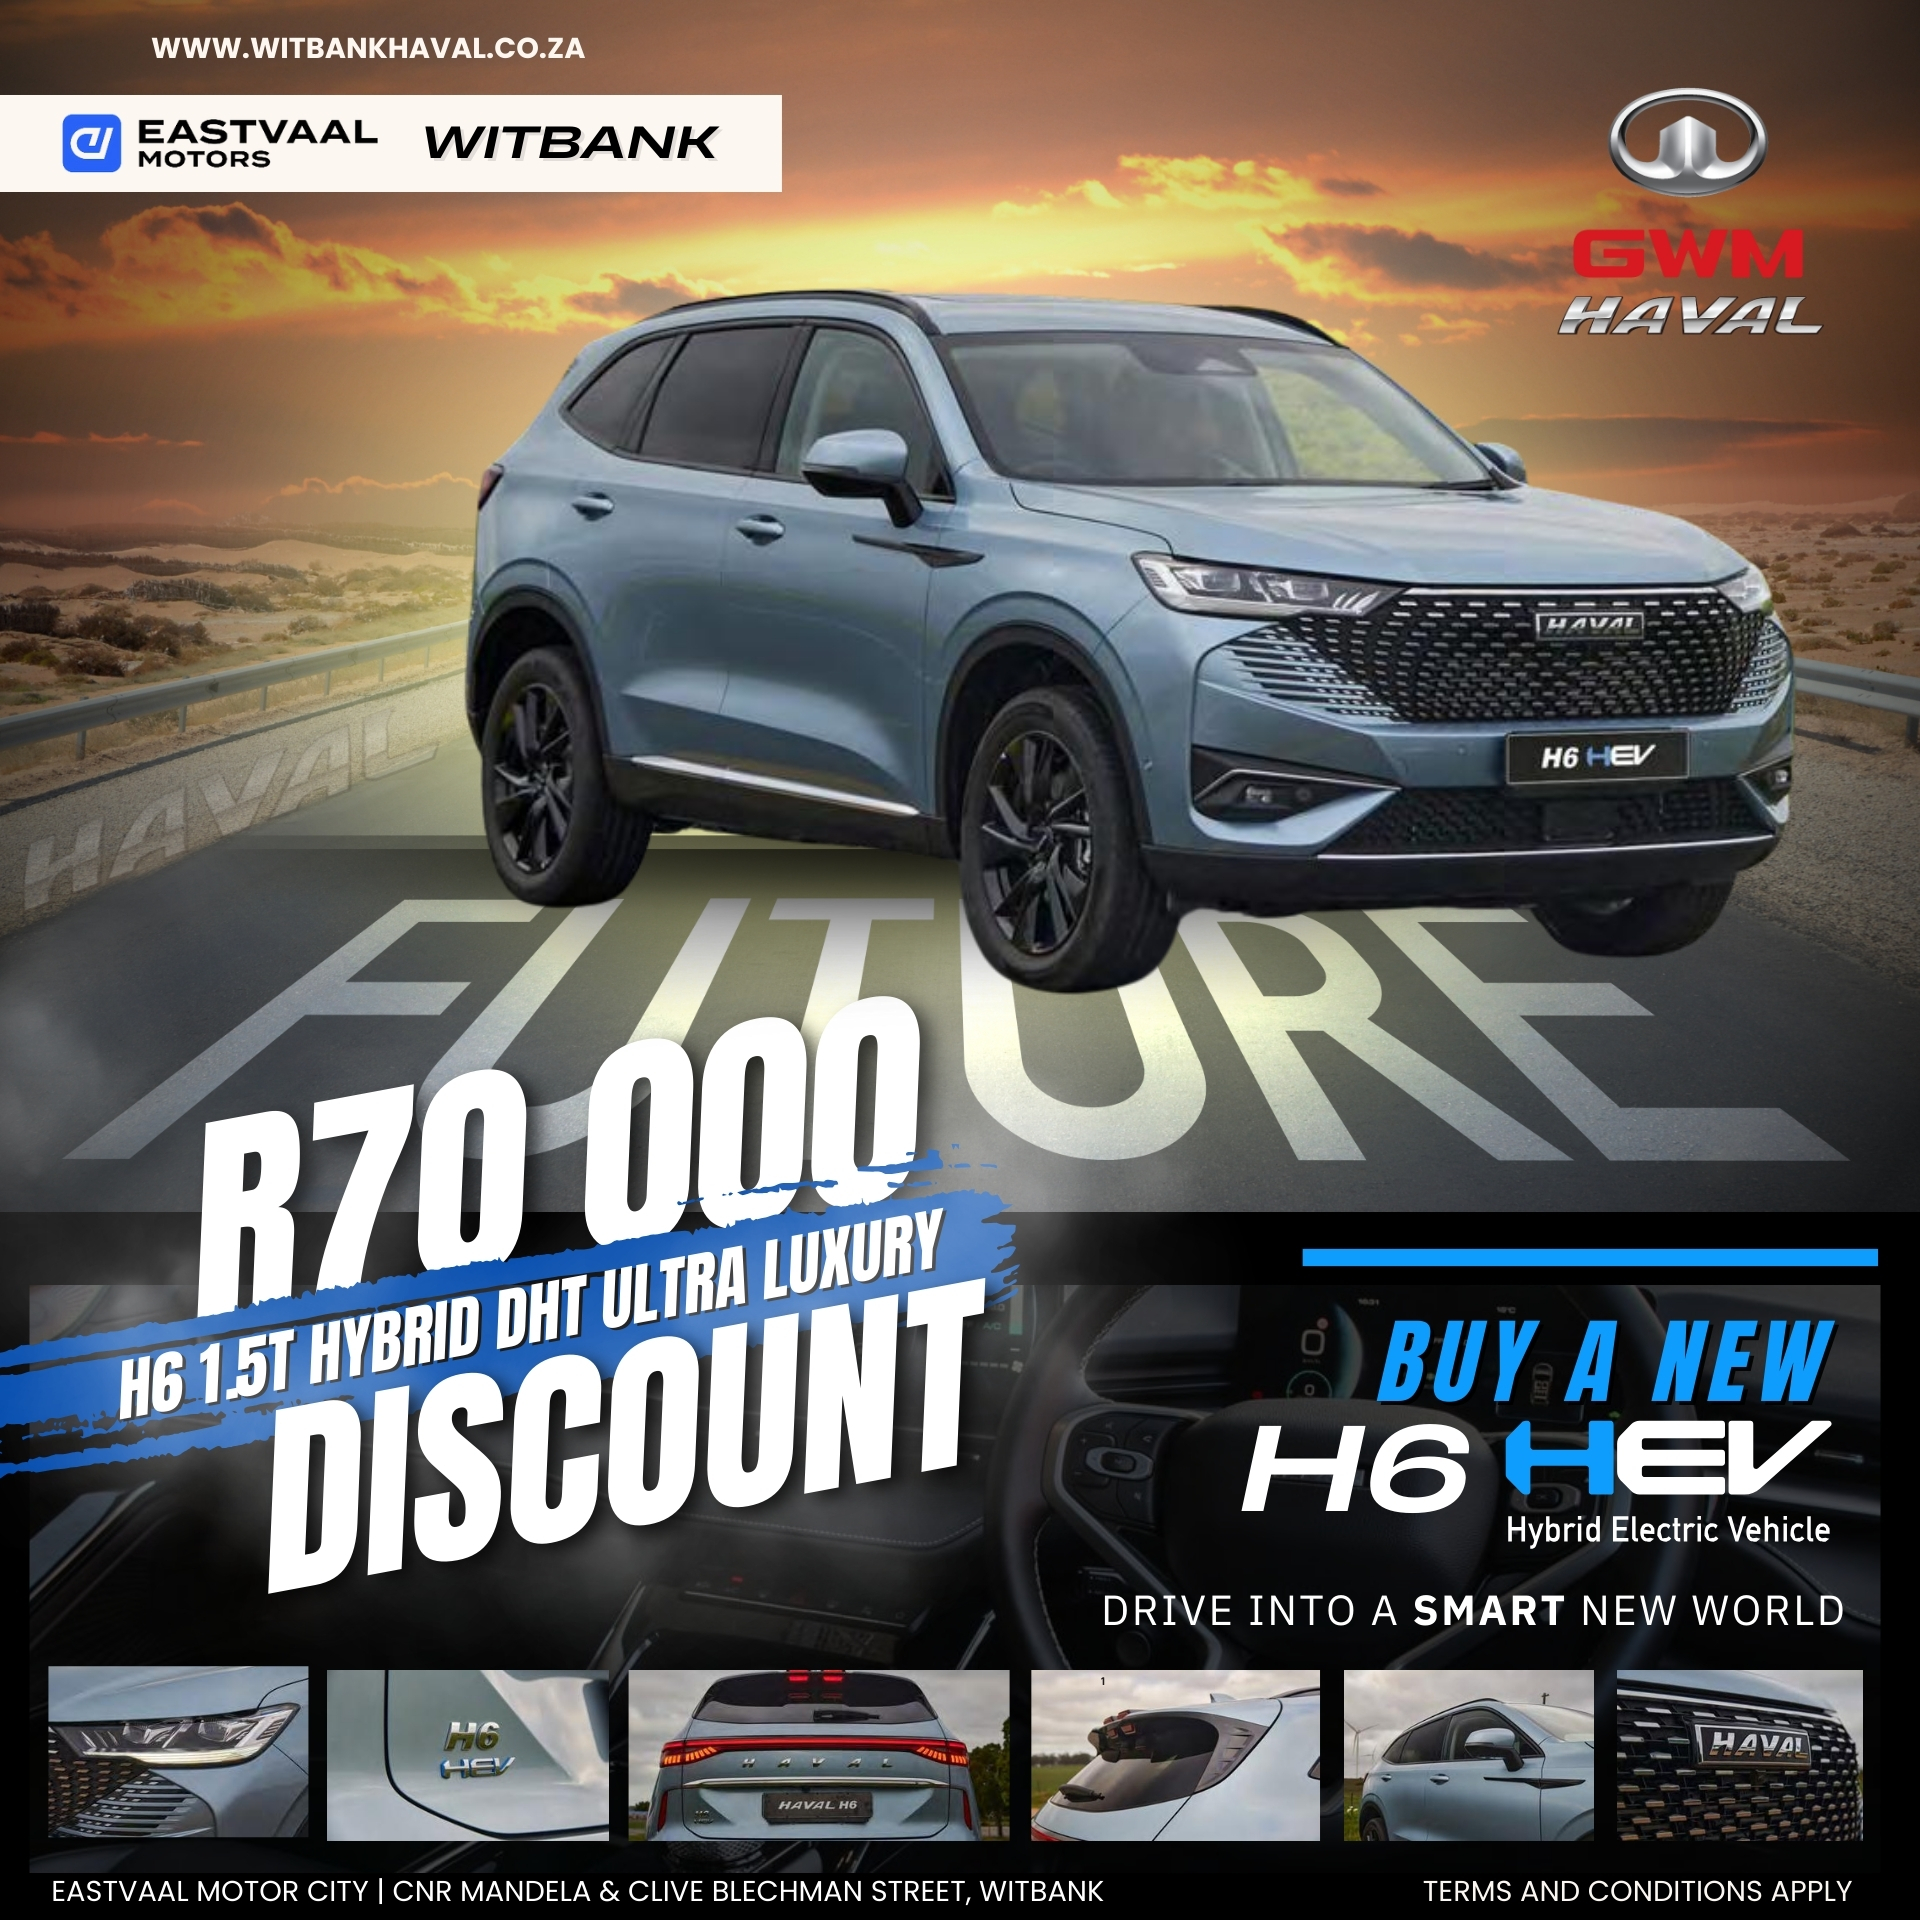 Haval H6 1.5 Hybrid image from 